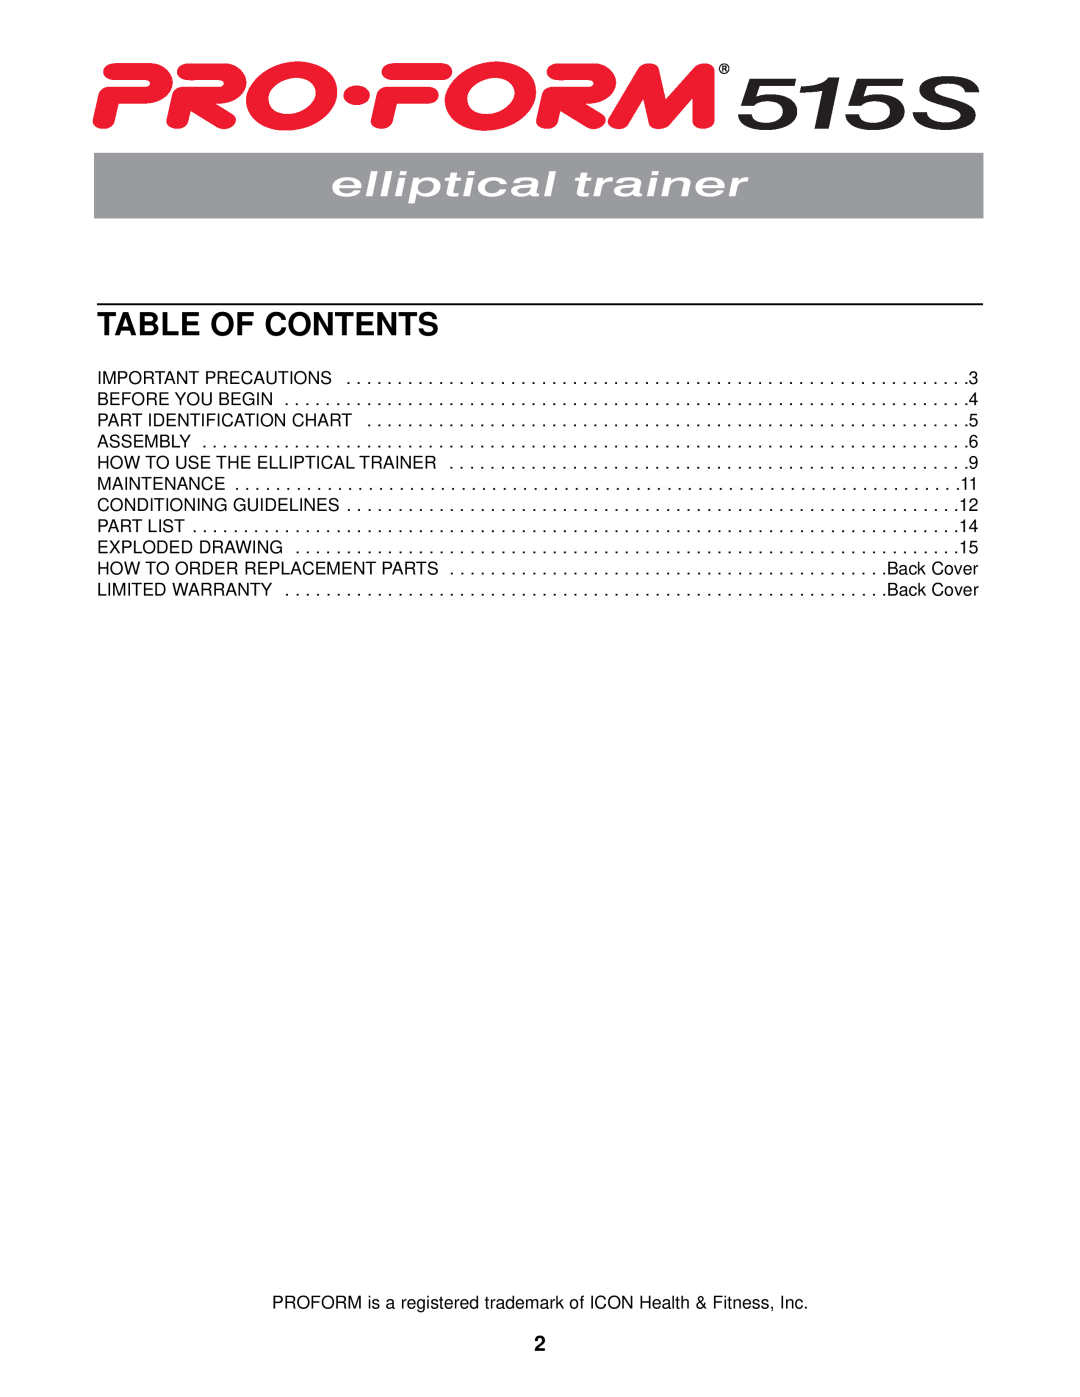 ProForm PFEL03010 user manual Table Of Contents, PROFORM is a registered trademark of ICON Health & Fitness, Inc 